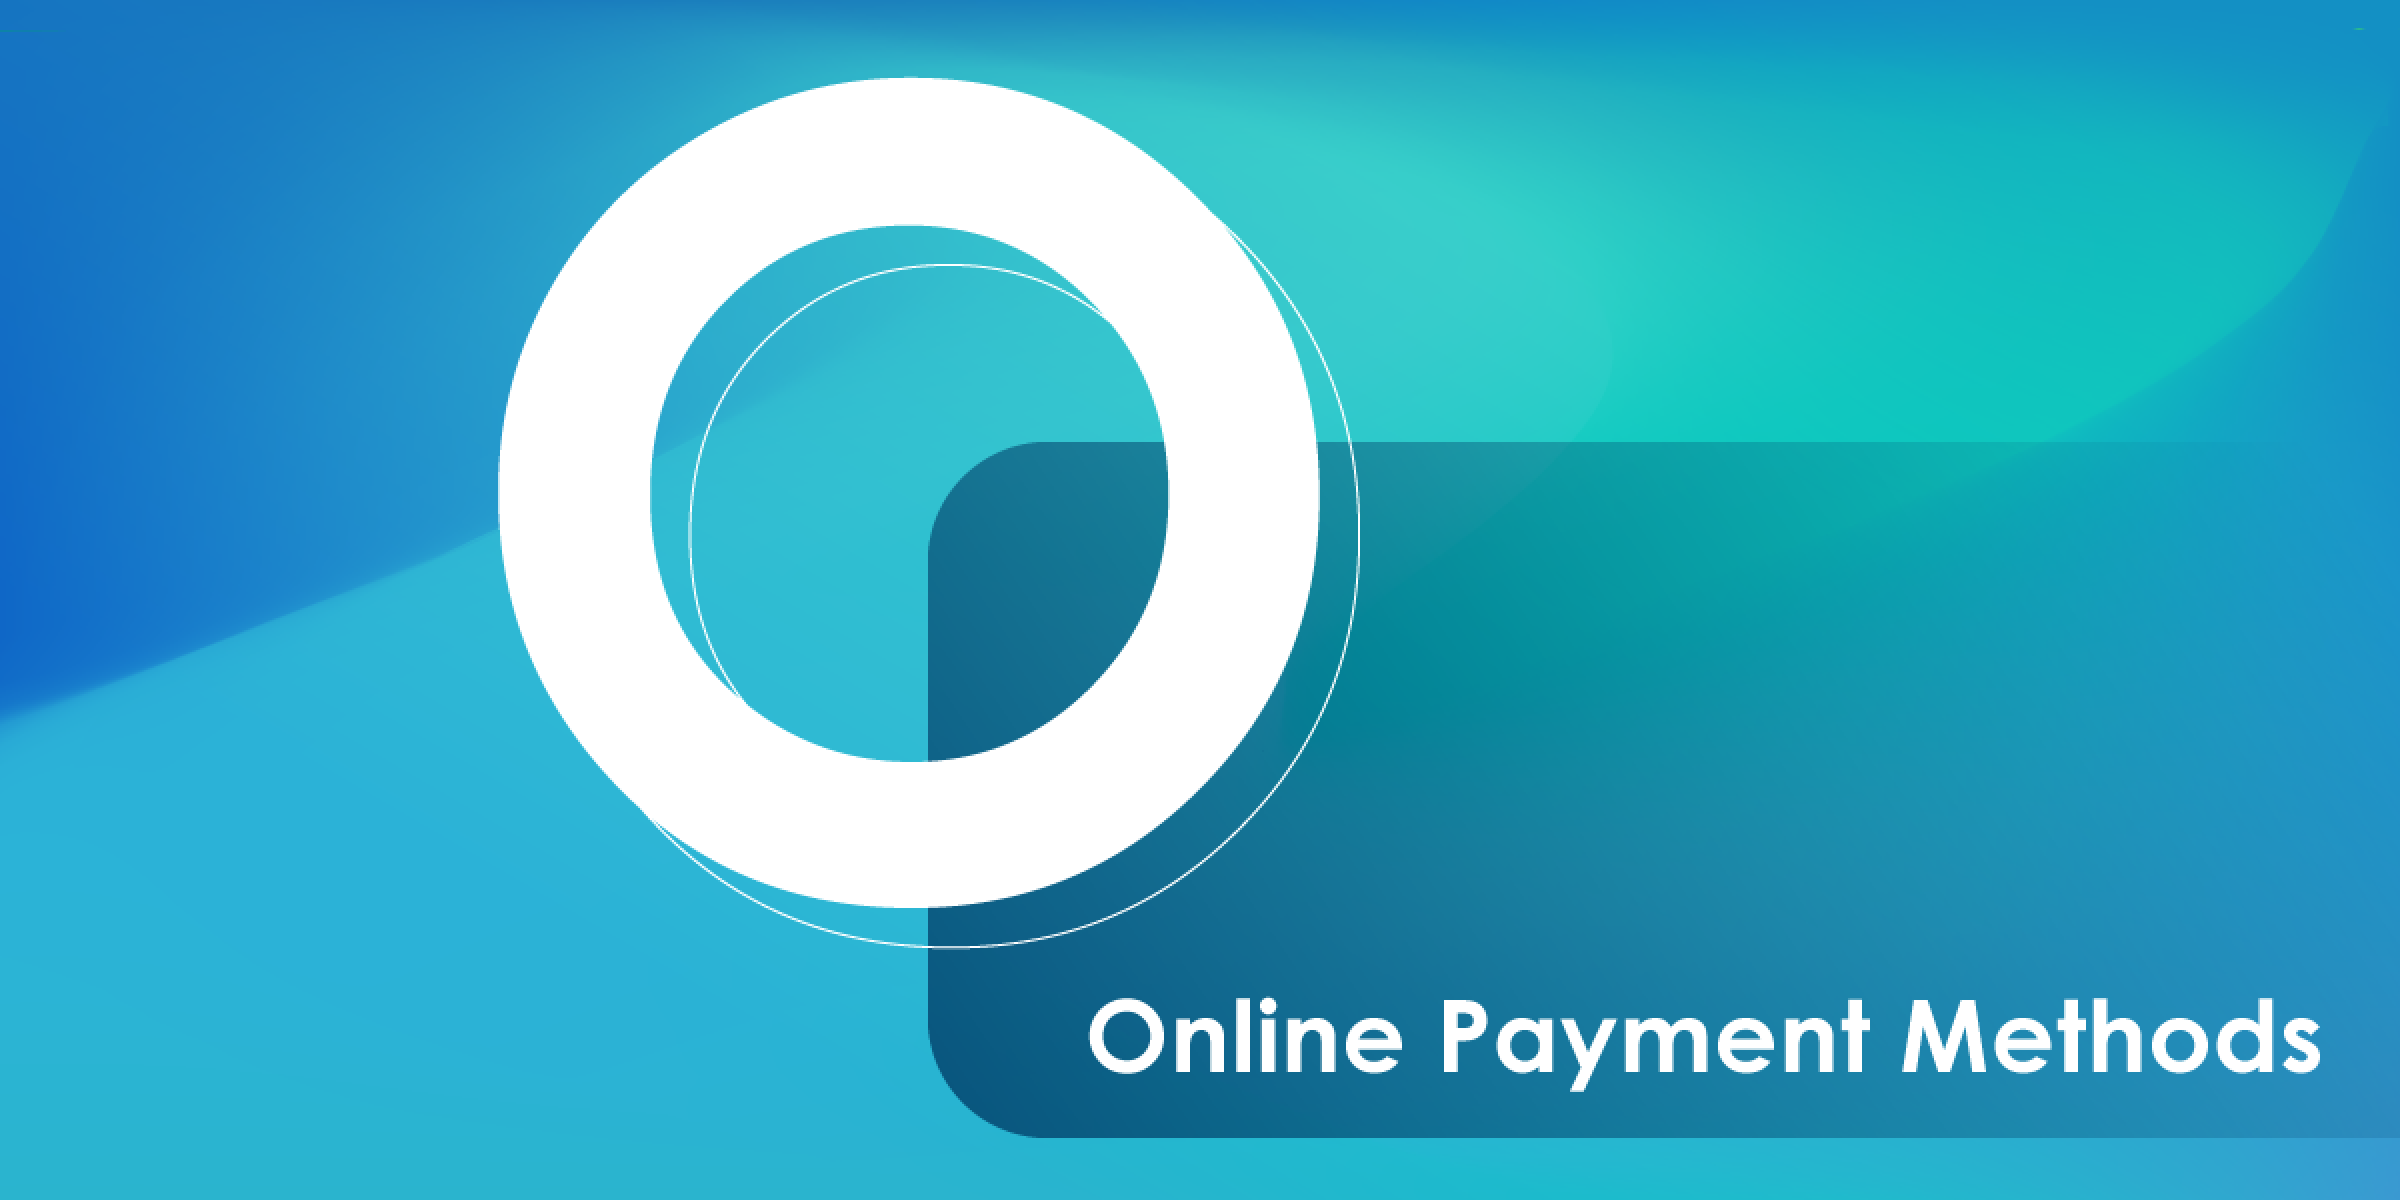 What Are Online Payment Methods: Definition, Types and Benefits